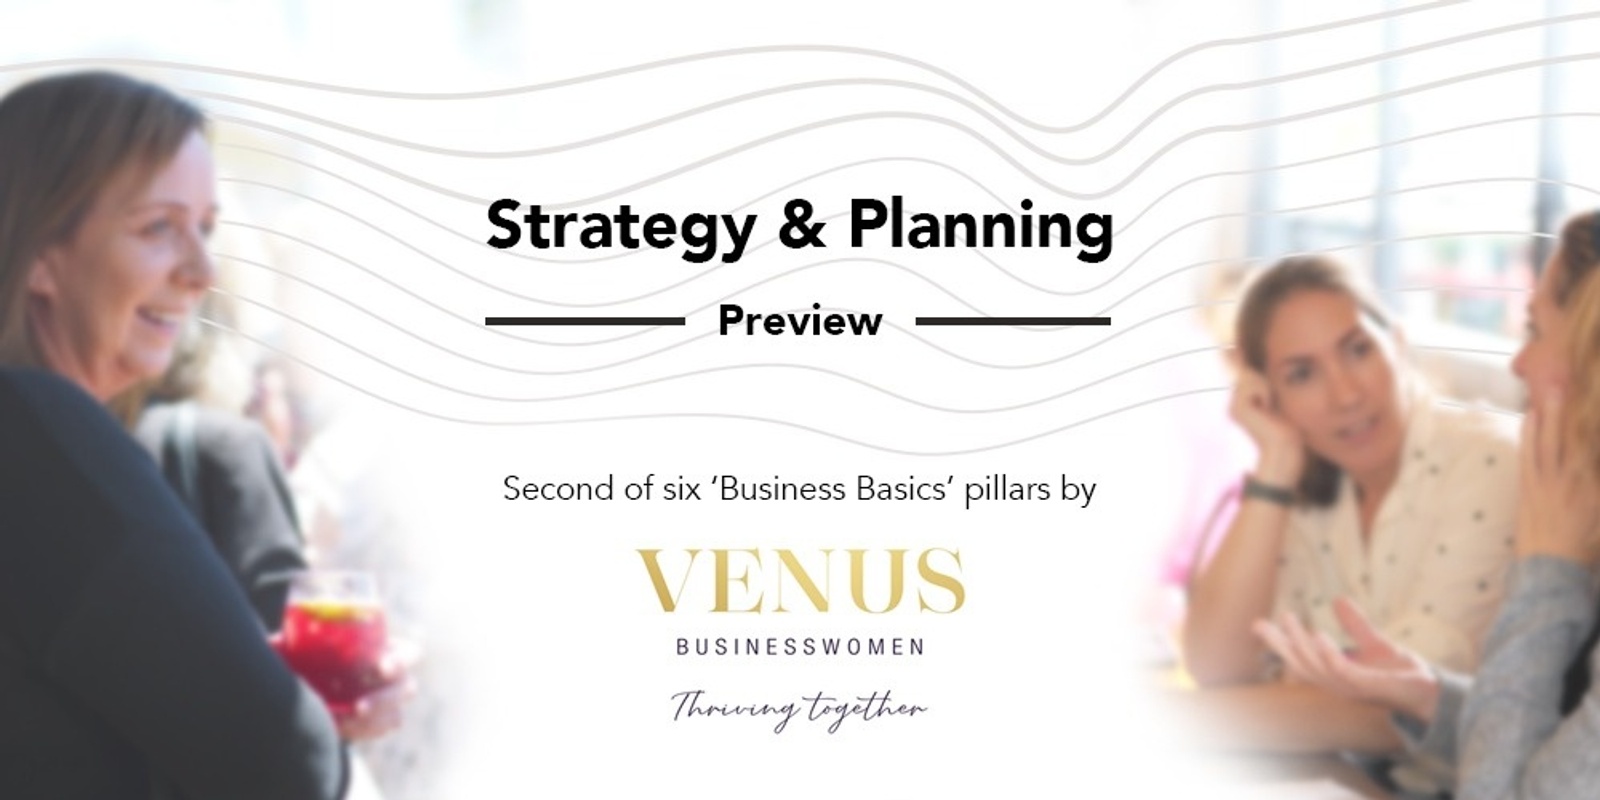 Banner image for Strategy & Planning Preview by Venus Businesswomen